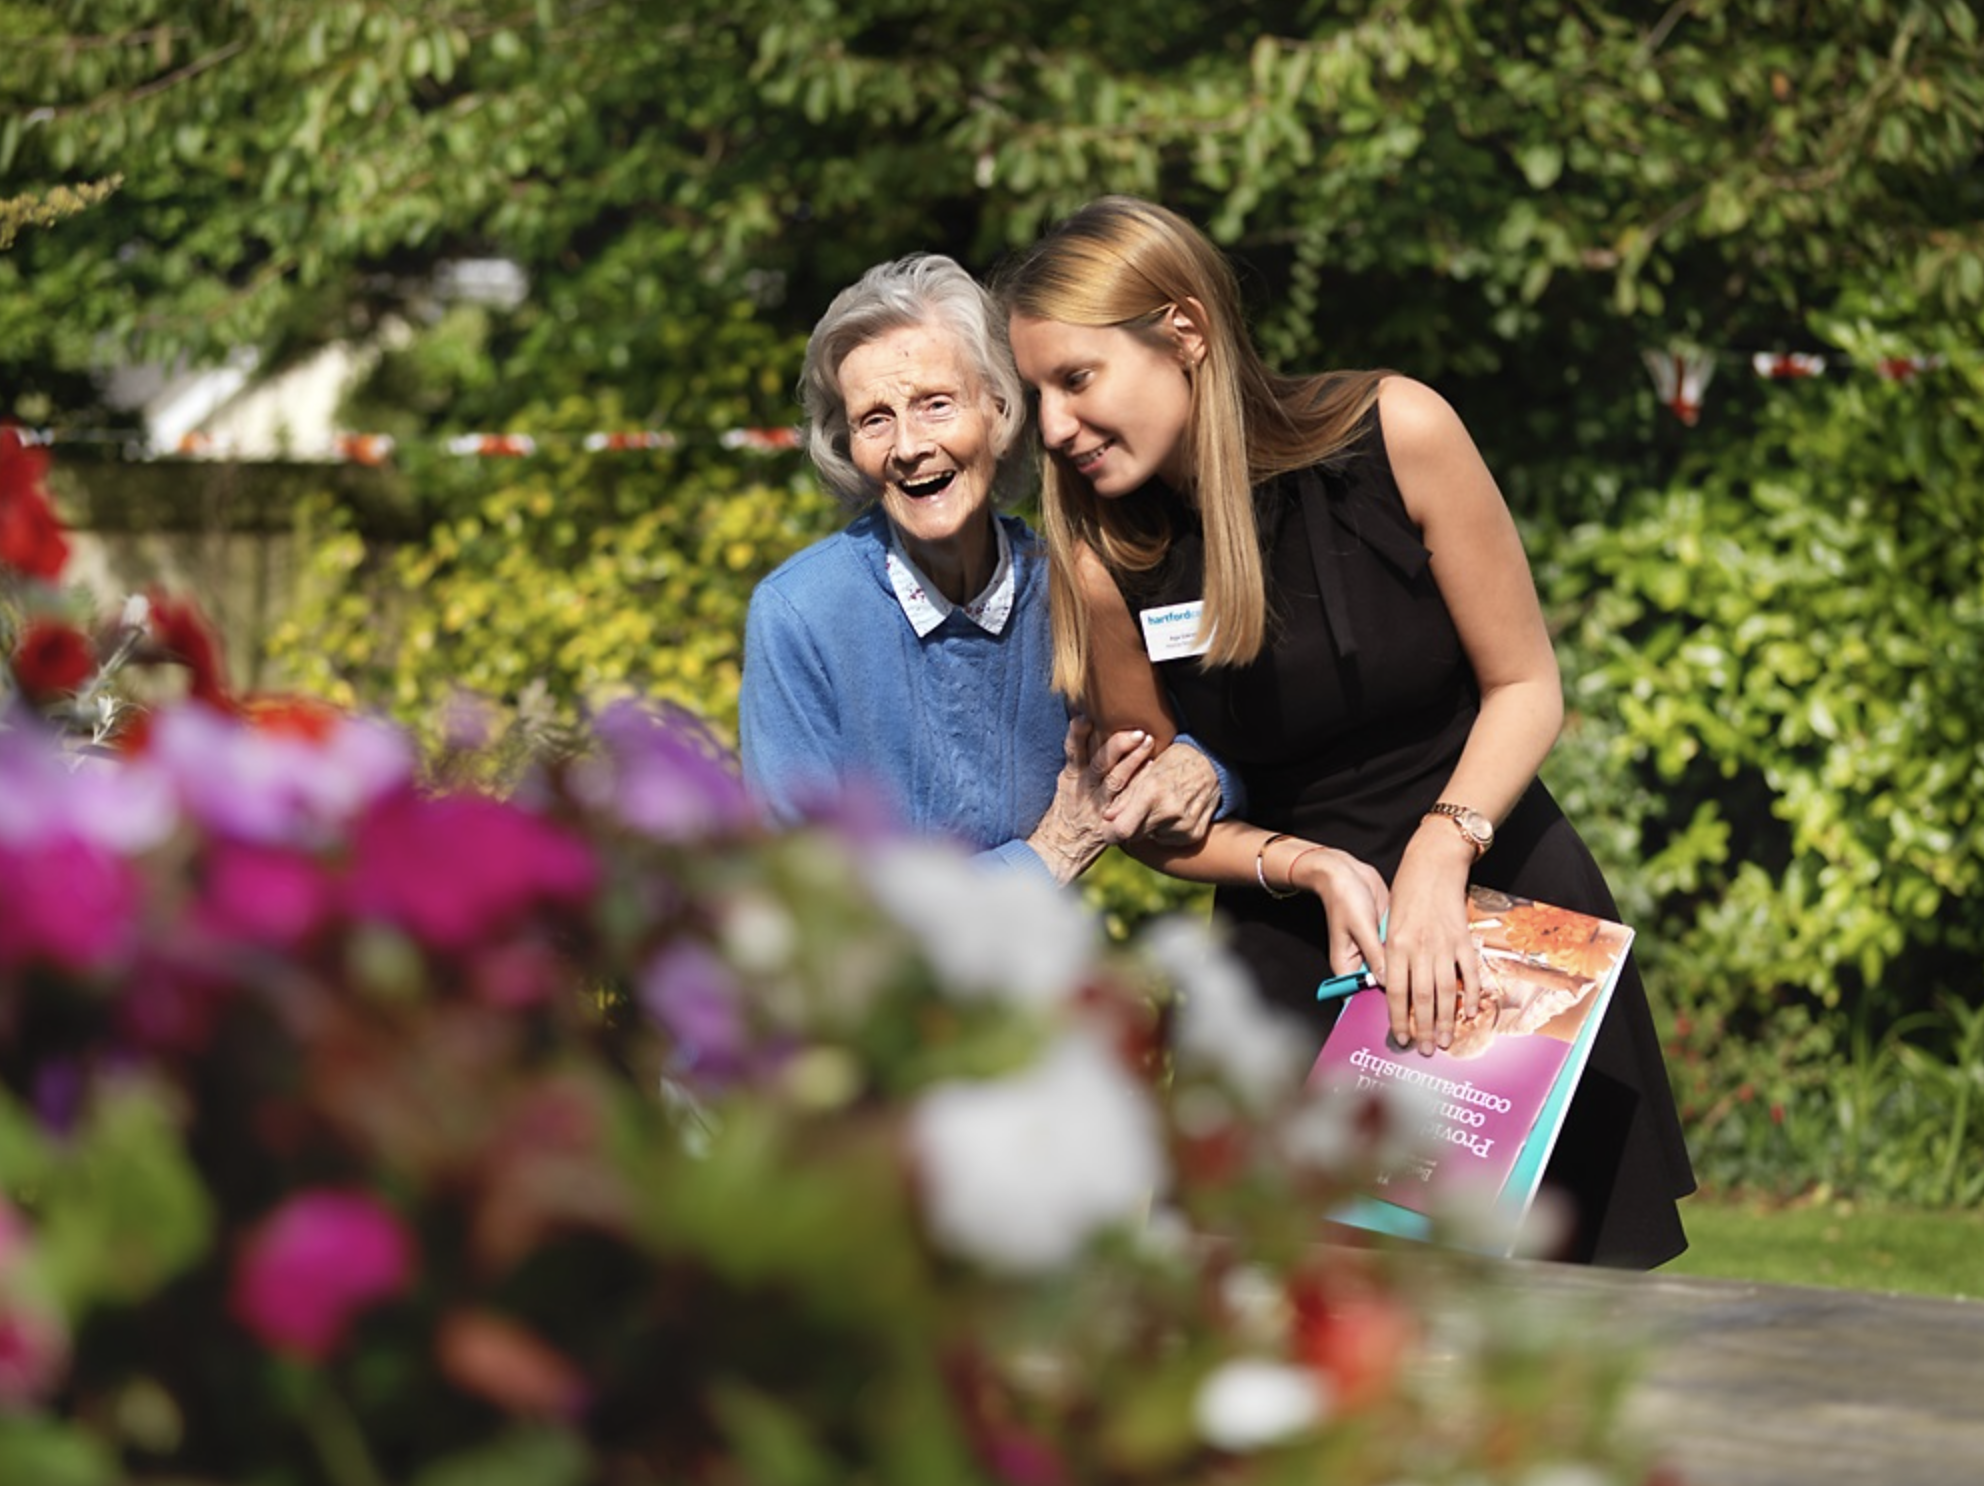 Garden and resident of Belford House care home in Alton, Hampshire